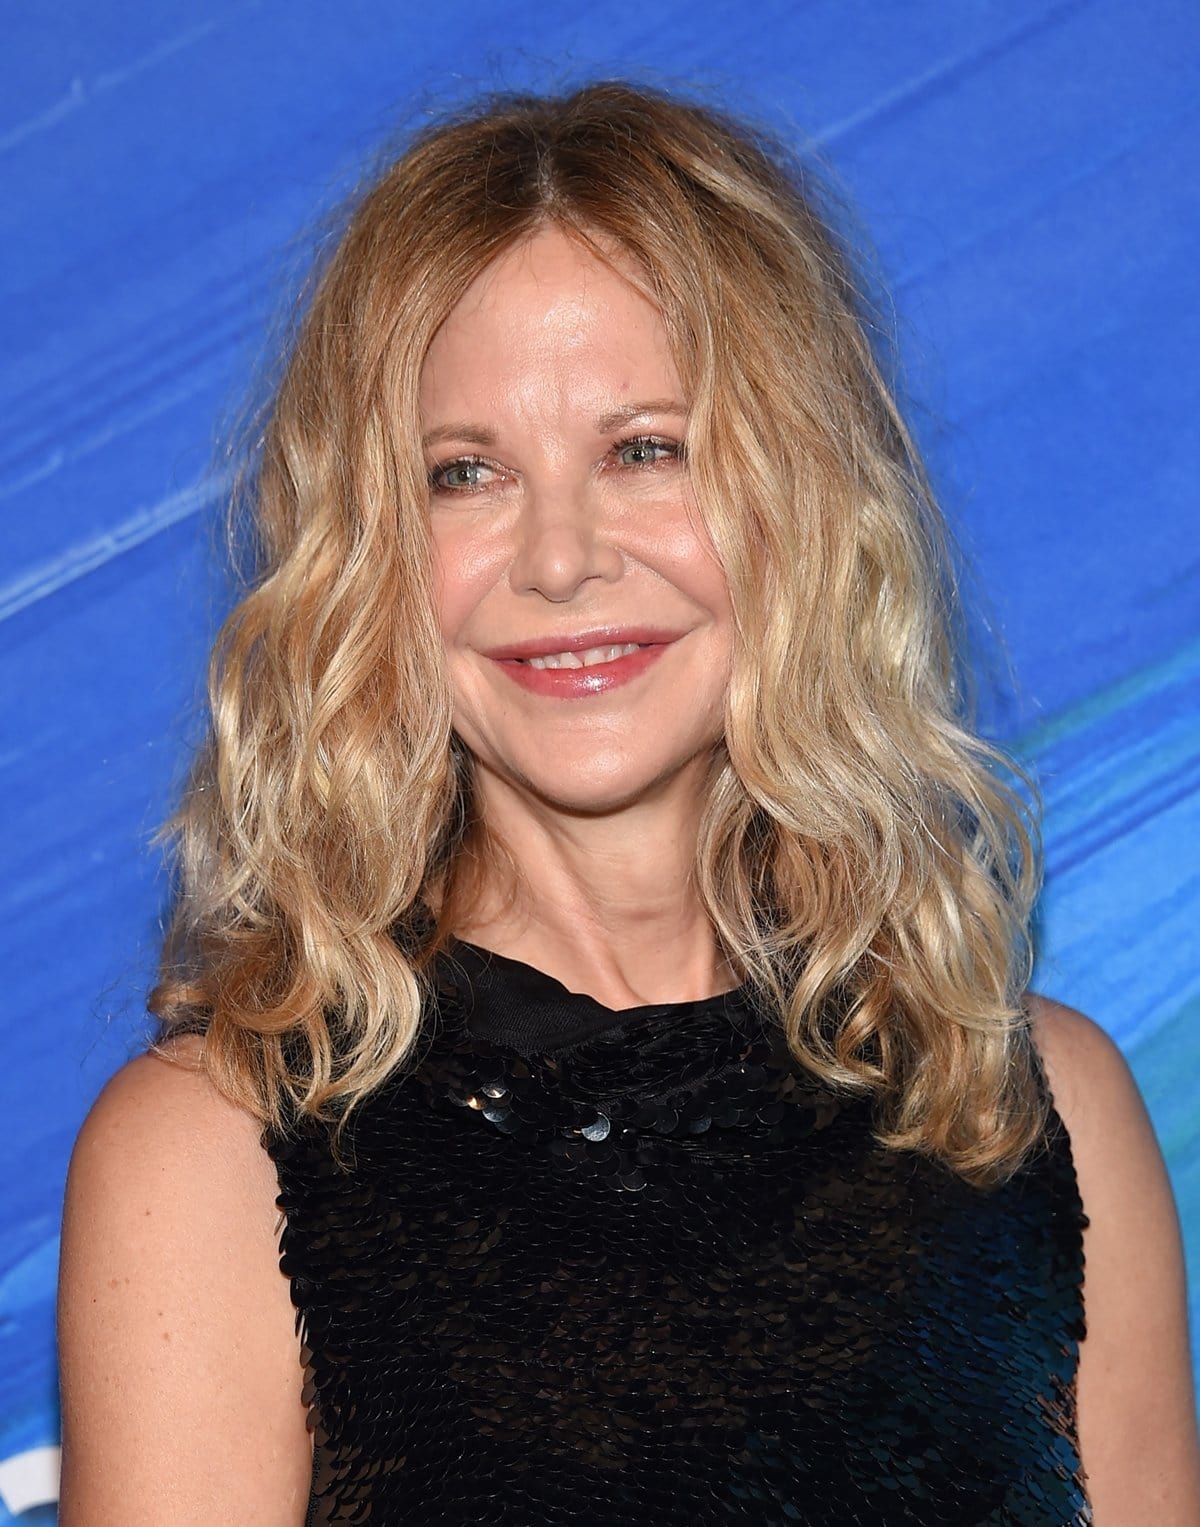 Meg Ryan's Net Worth How Much Did She Make From Her Most Famous Films?